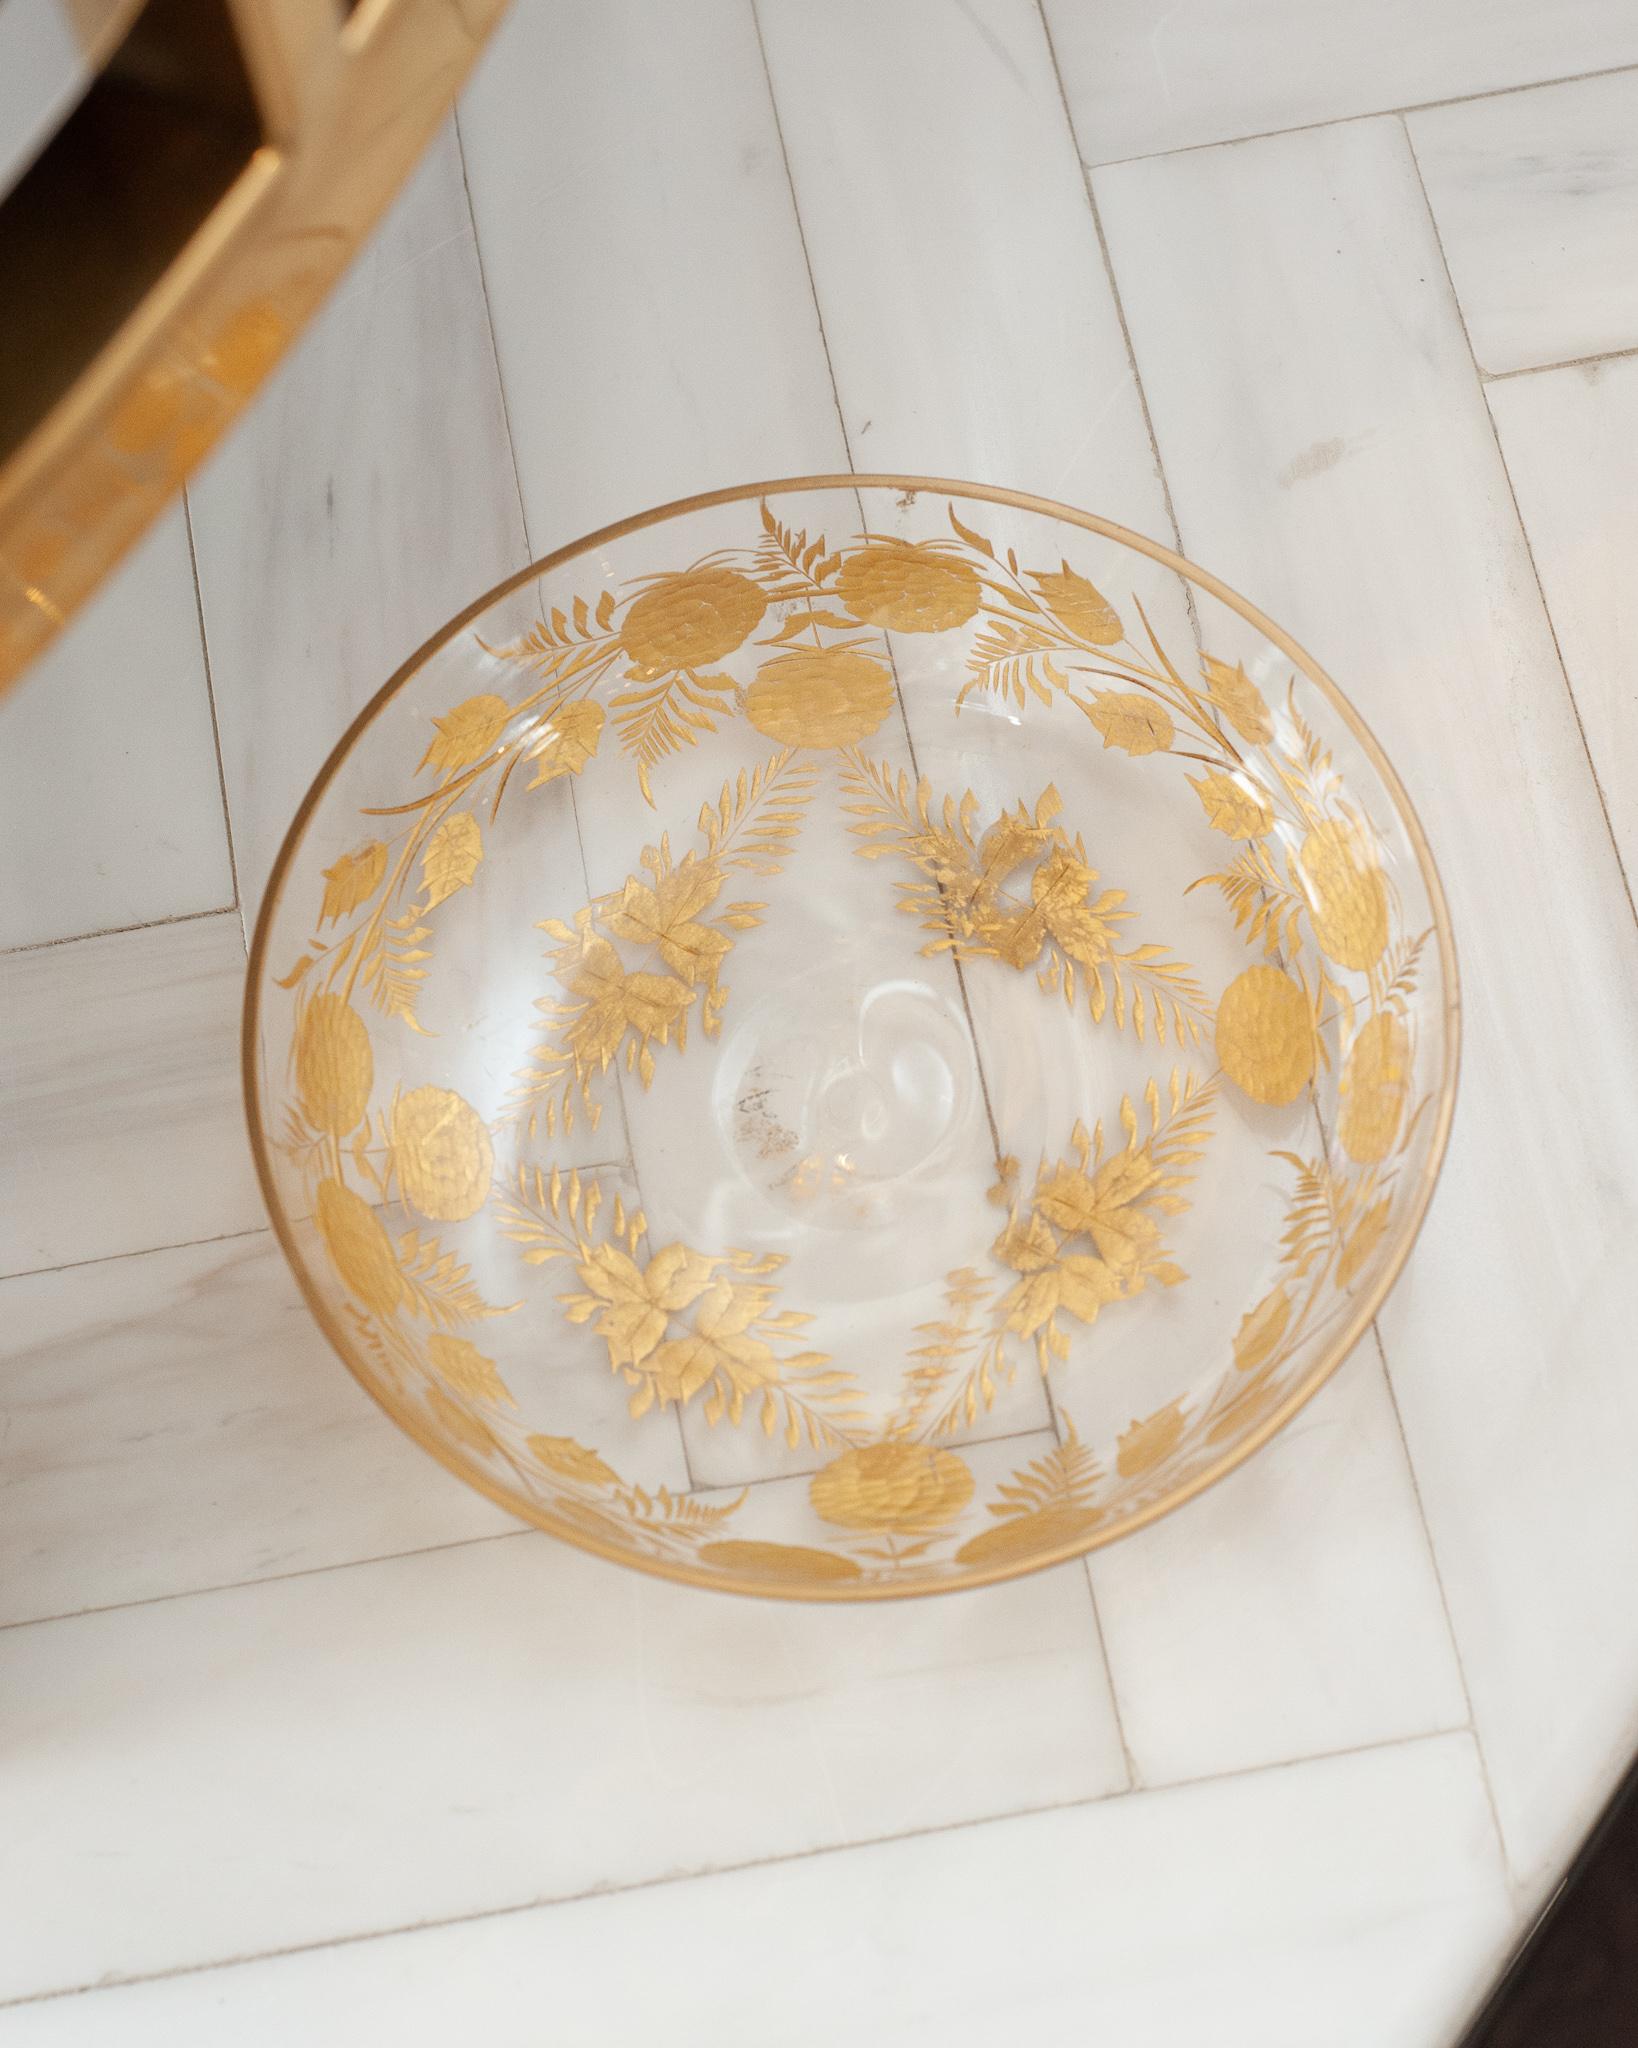 A stunning etched and gilded antique Moser crystal bowl. A fine example of top quality craftsmanship from the turn of the century. Perfect for decorative or serving use.